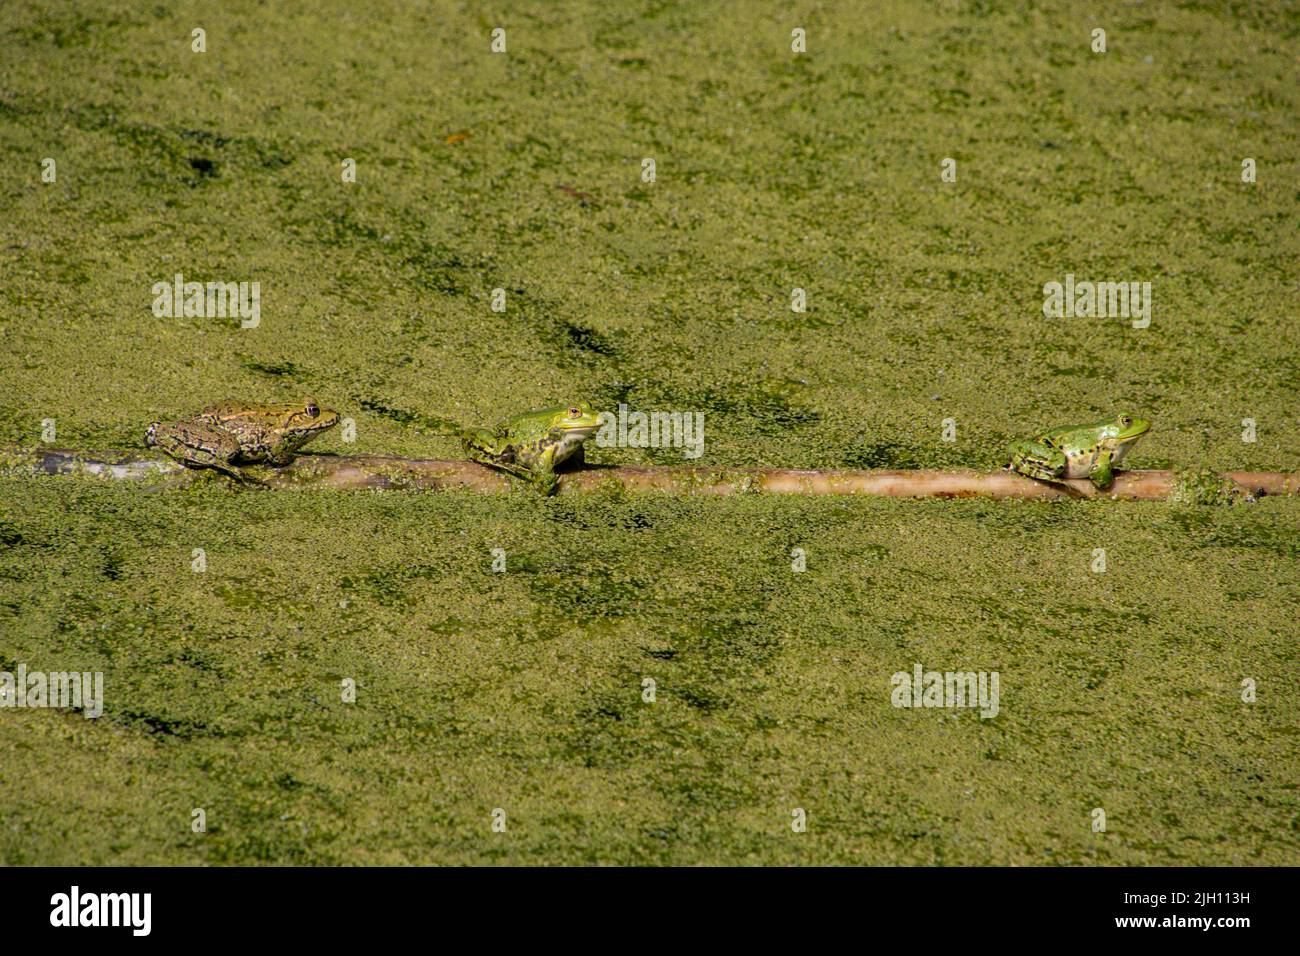 Three frogs sitting on a wooden pole Stock Photo